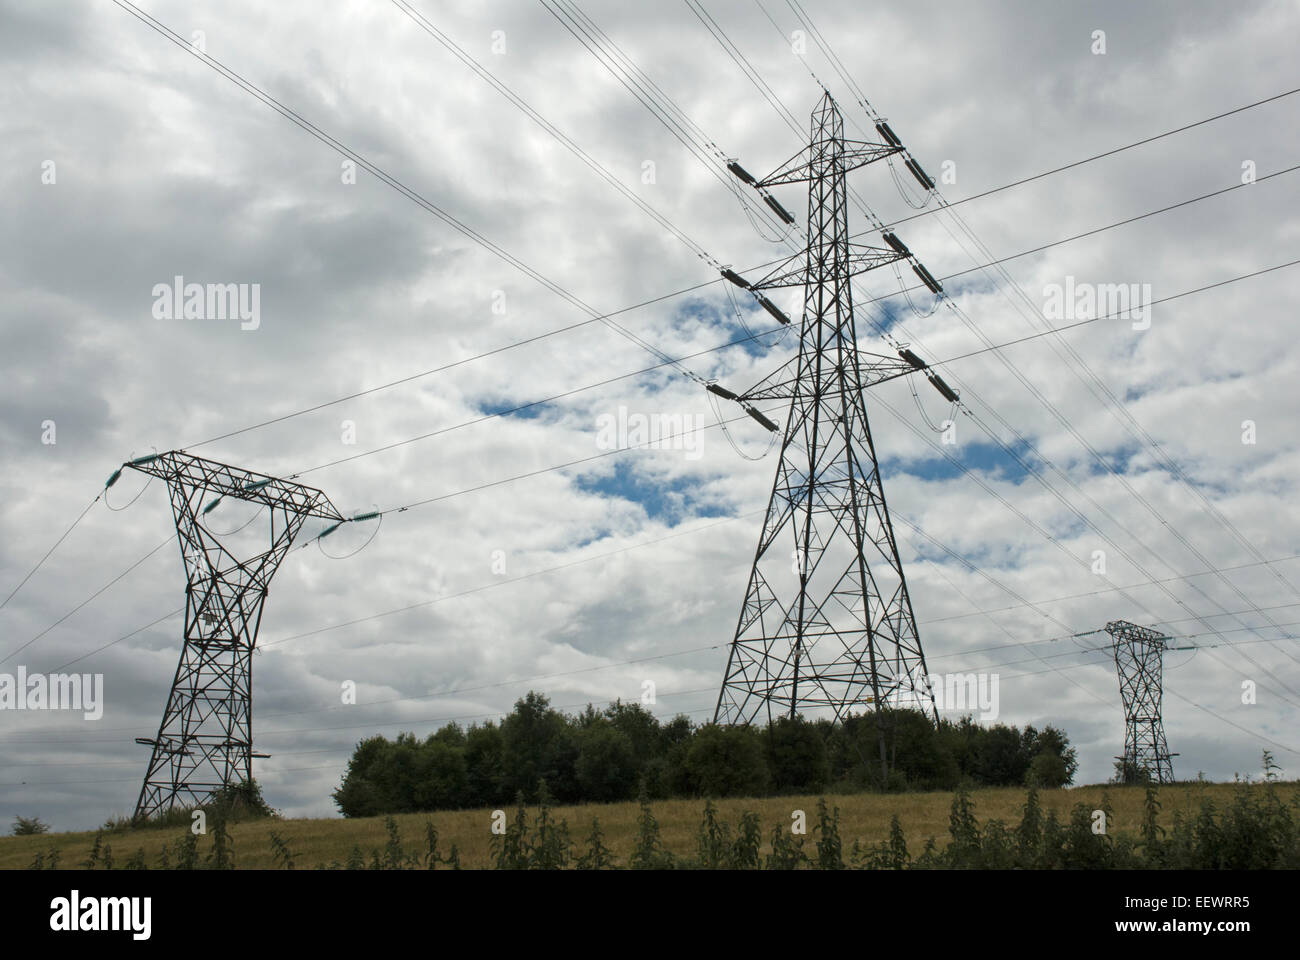 Pylons and electricity power line in English countryside Stock Photo